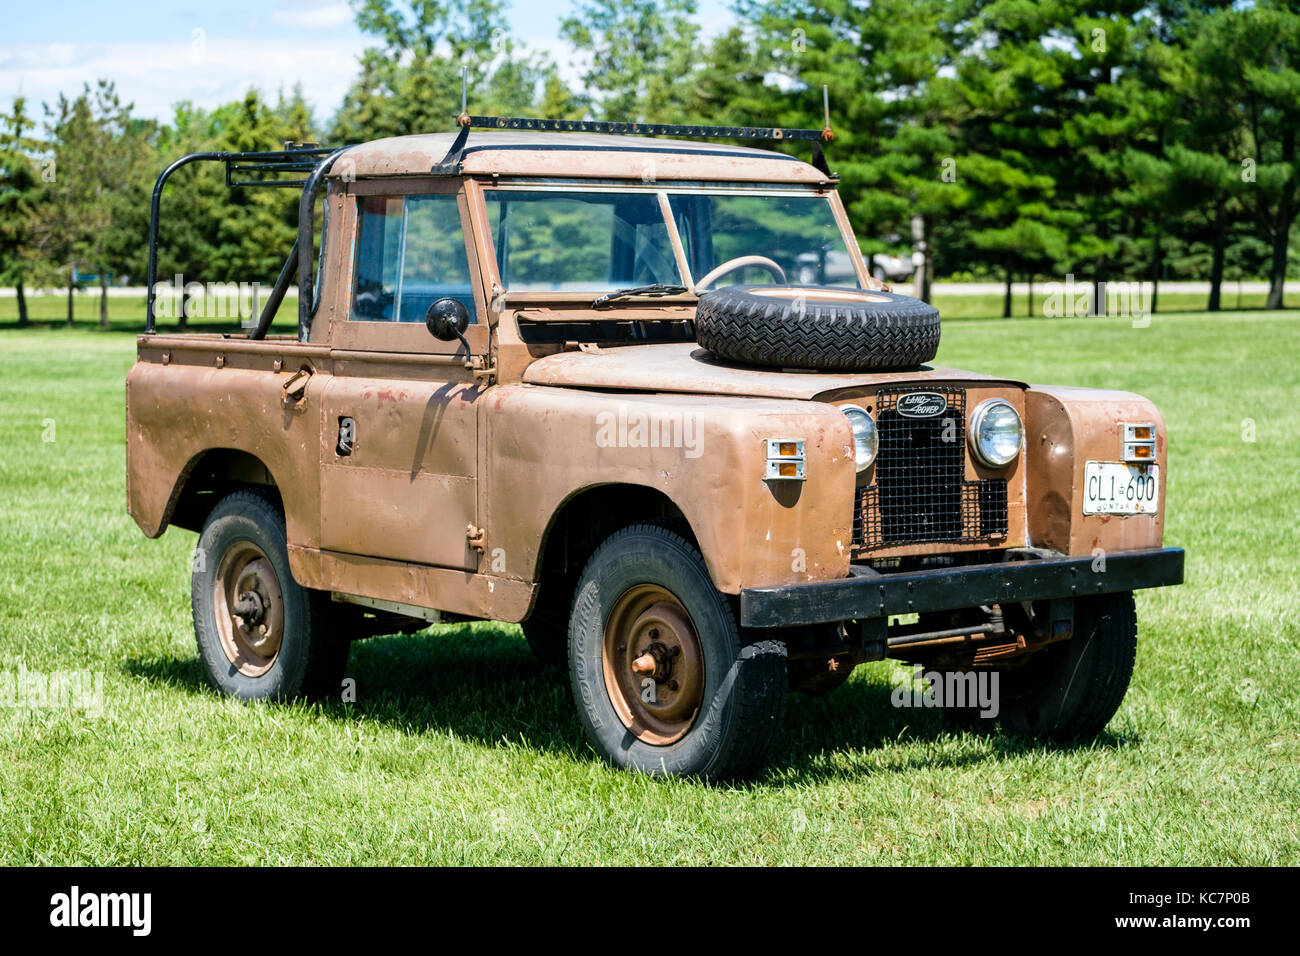 Old Land Rover Series IIa, Series 2a, Series 2, 88, pick-up truck, 4x4 all-terrain vehicle, modified, front view, 1960s Stock Photo